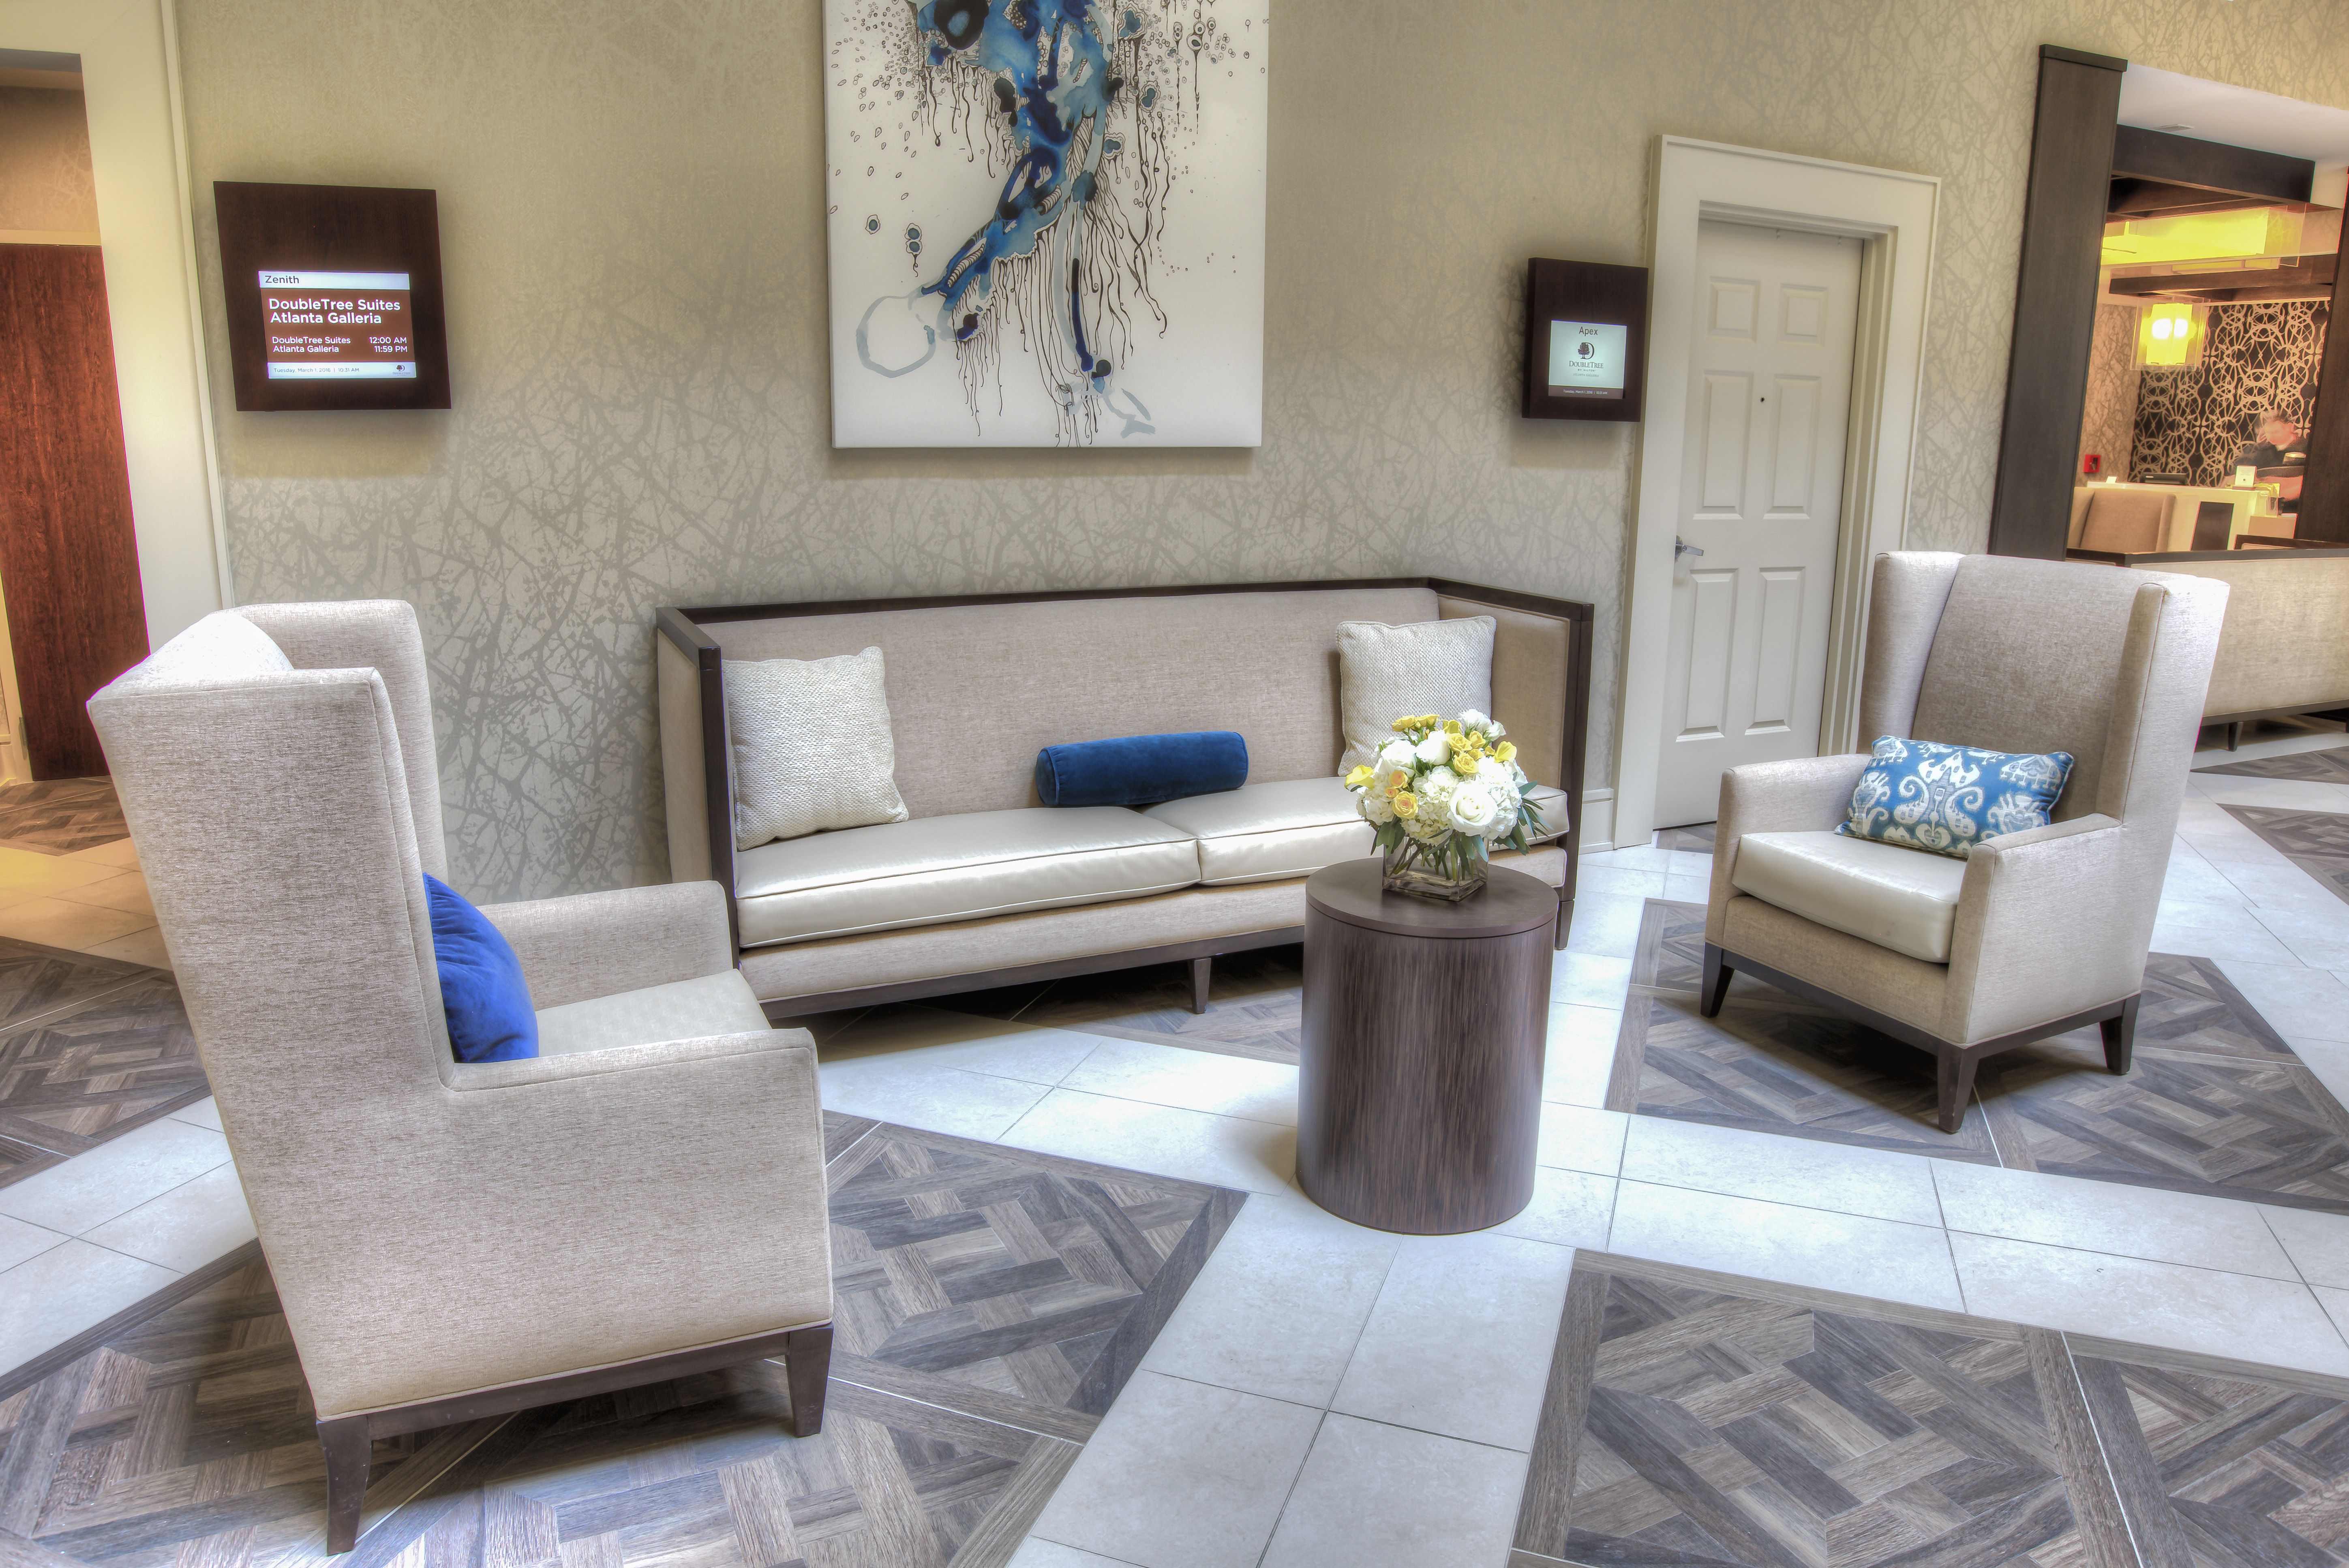 Wall Art, Table, and Lounge Seating in Lobby Area